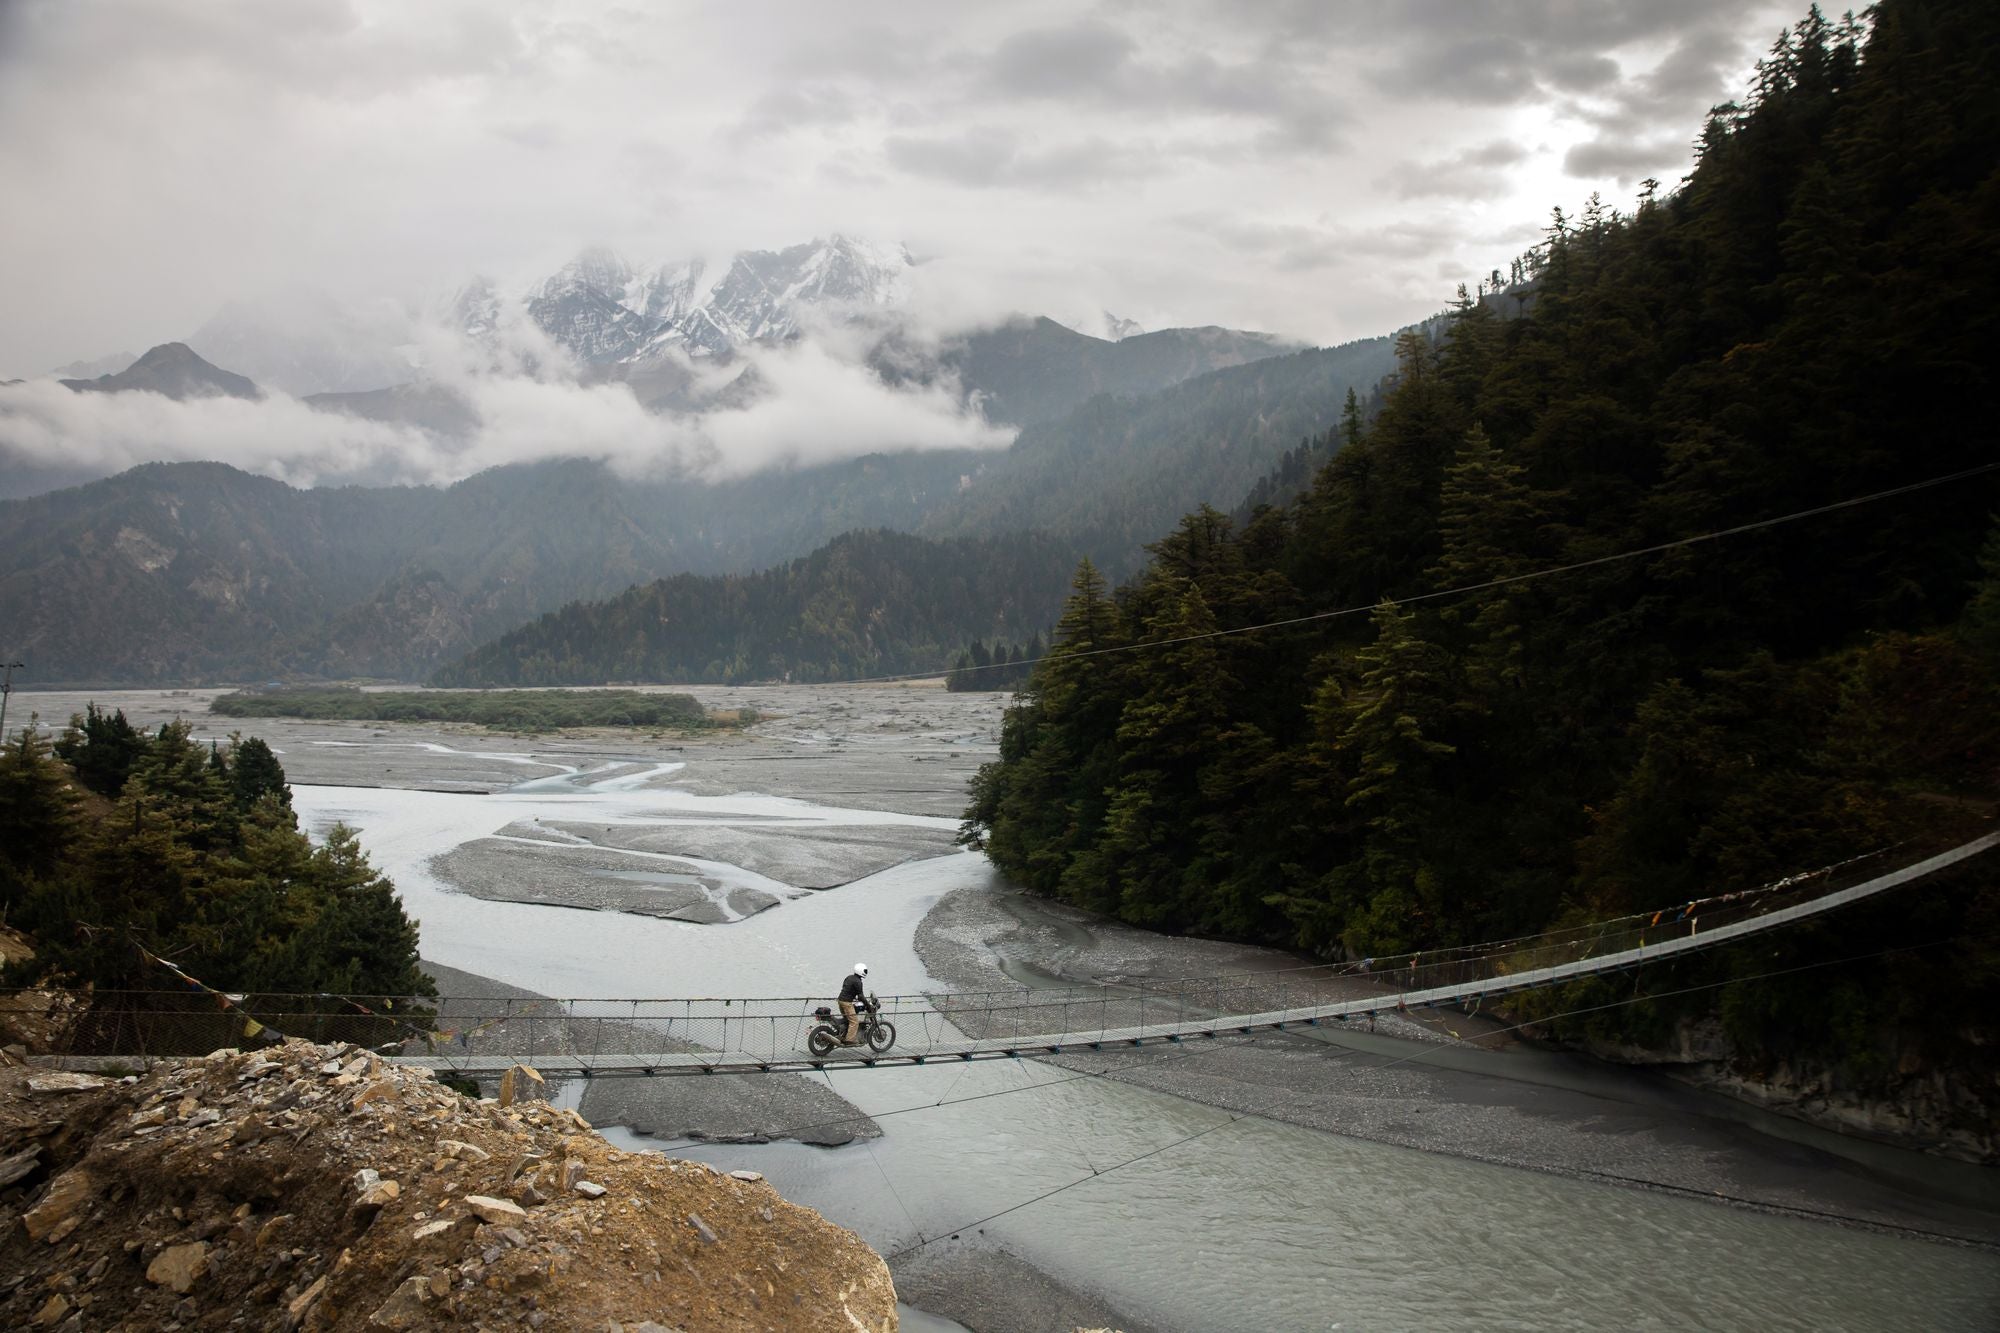 Chasing the Wizard: A Motorcycle Adventure in Nepal